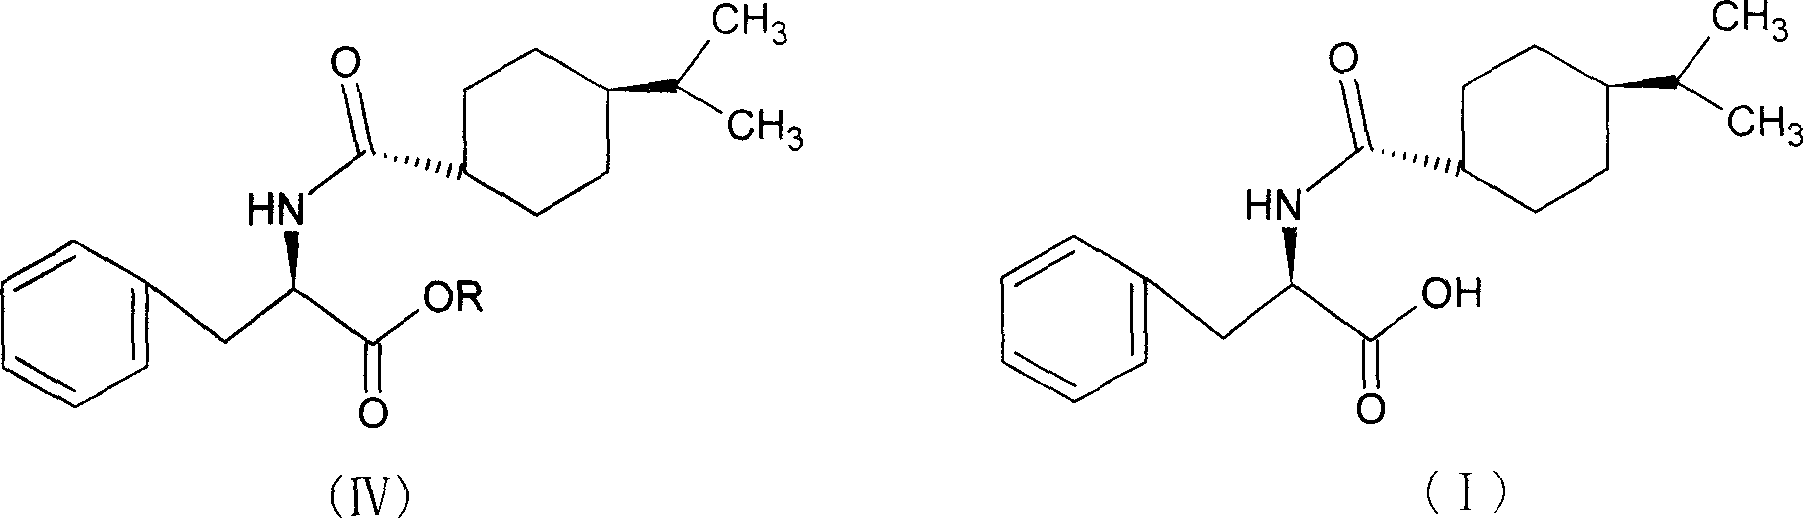 Synthesis of pharmaceutical